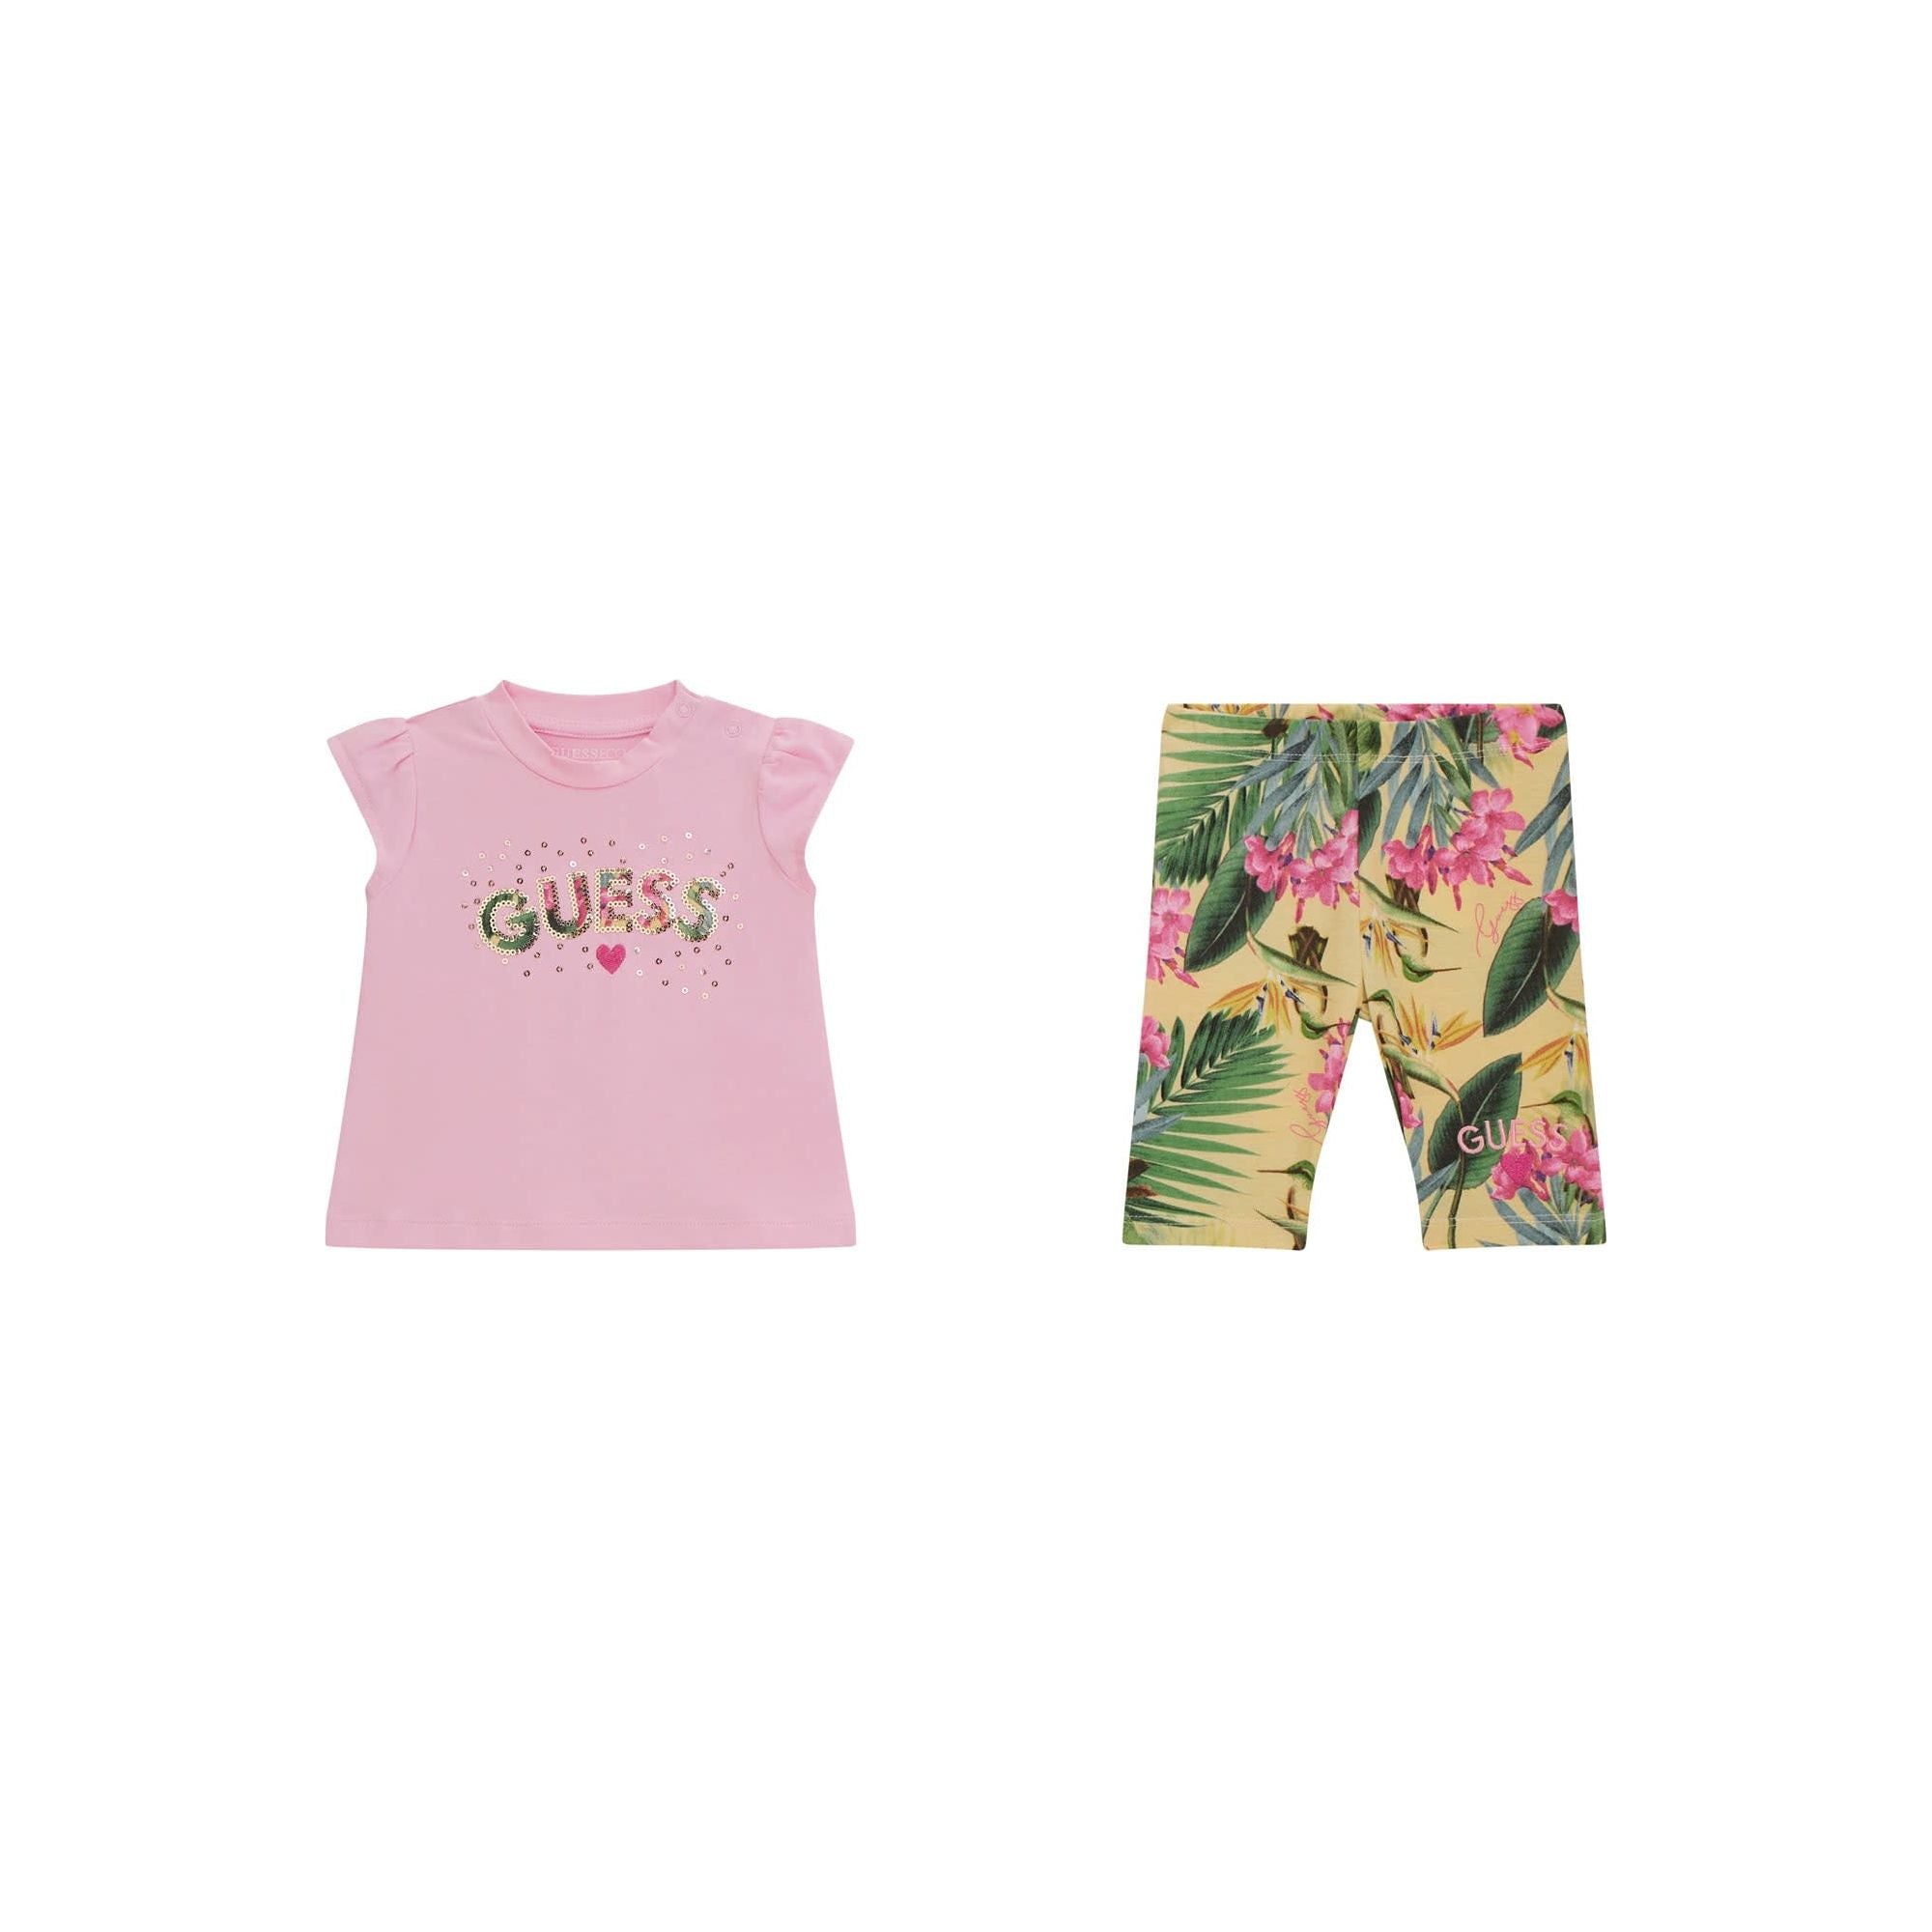 Guess - Infant Girls 2 Piece Set in Wild Tulip